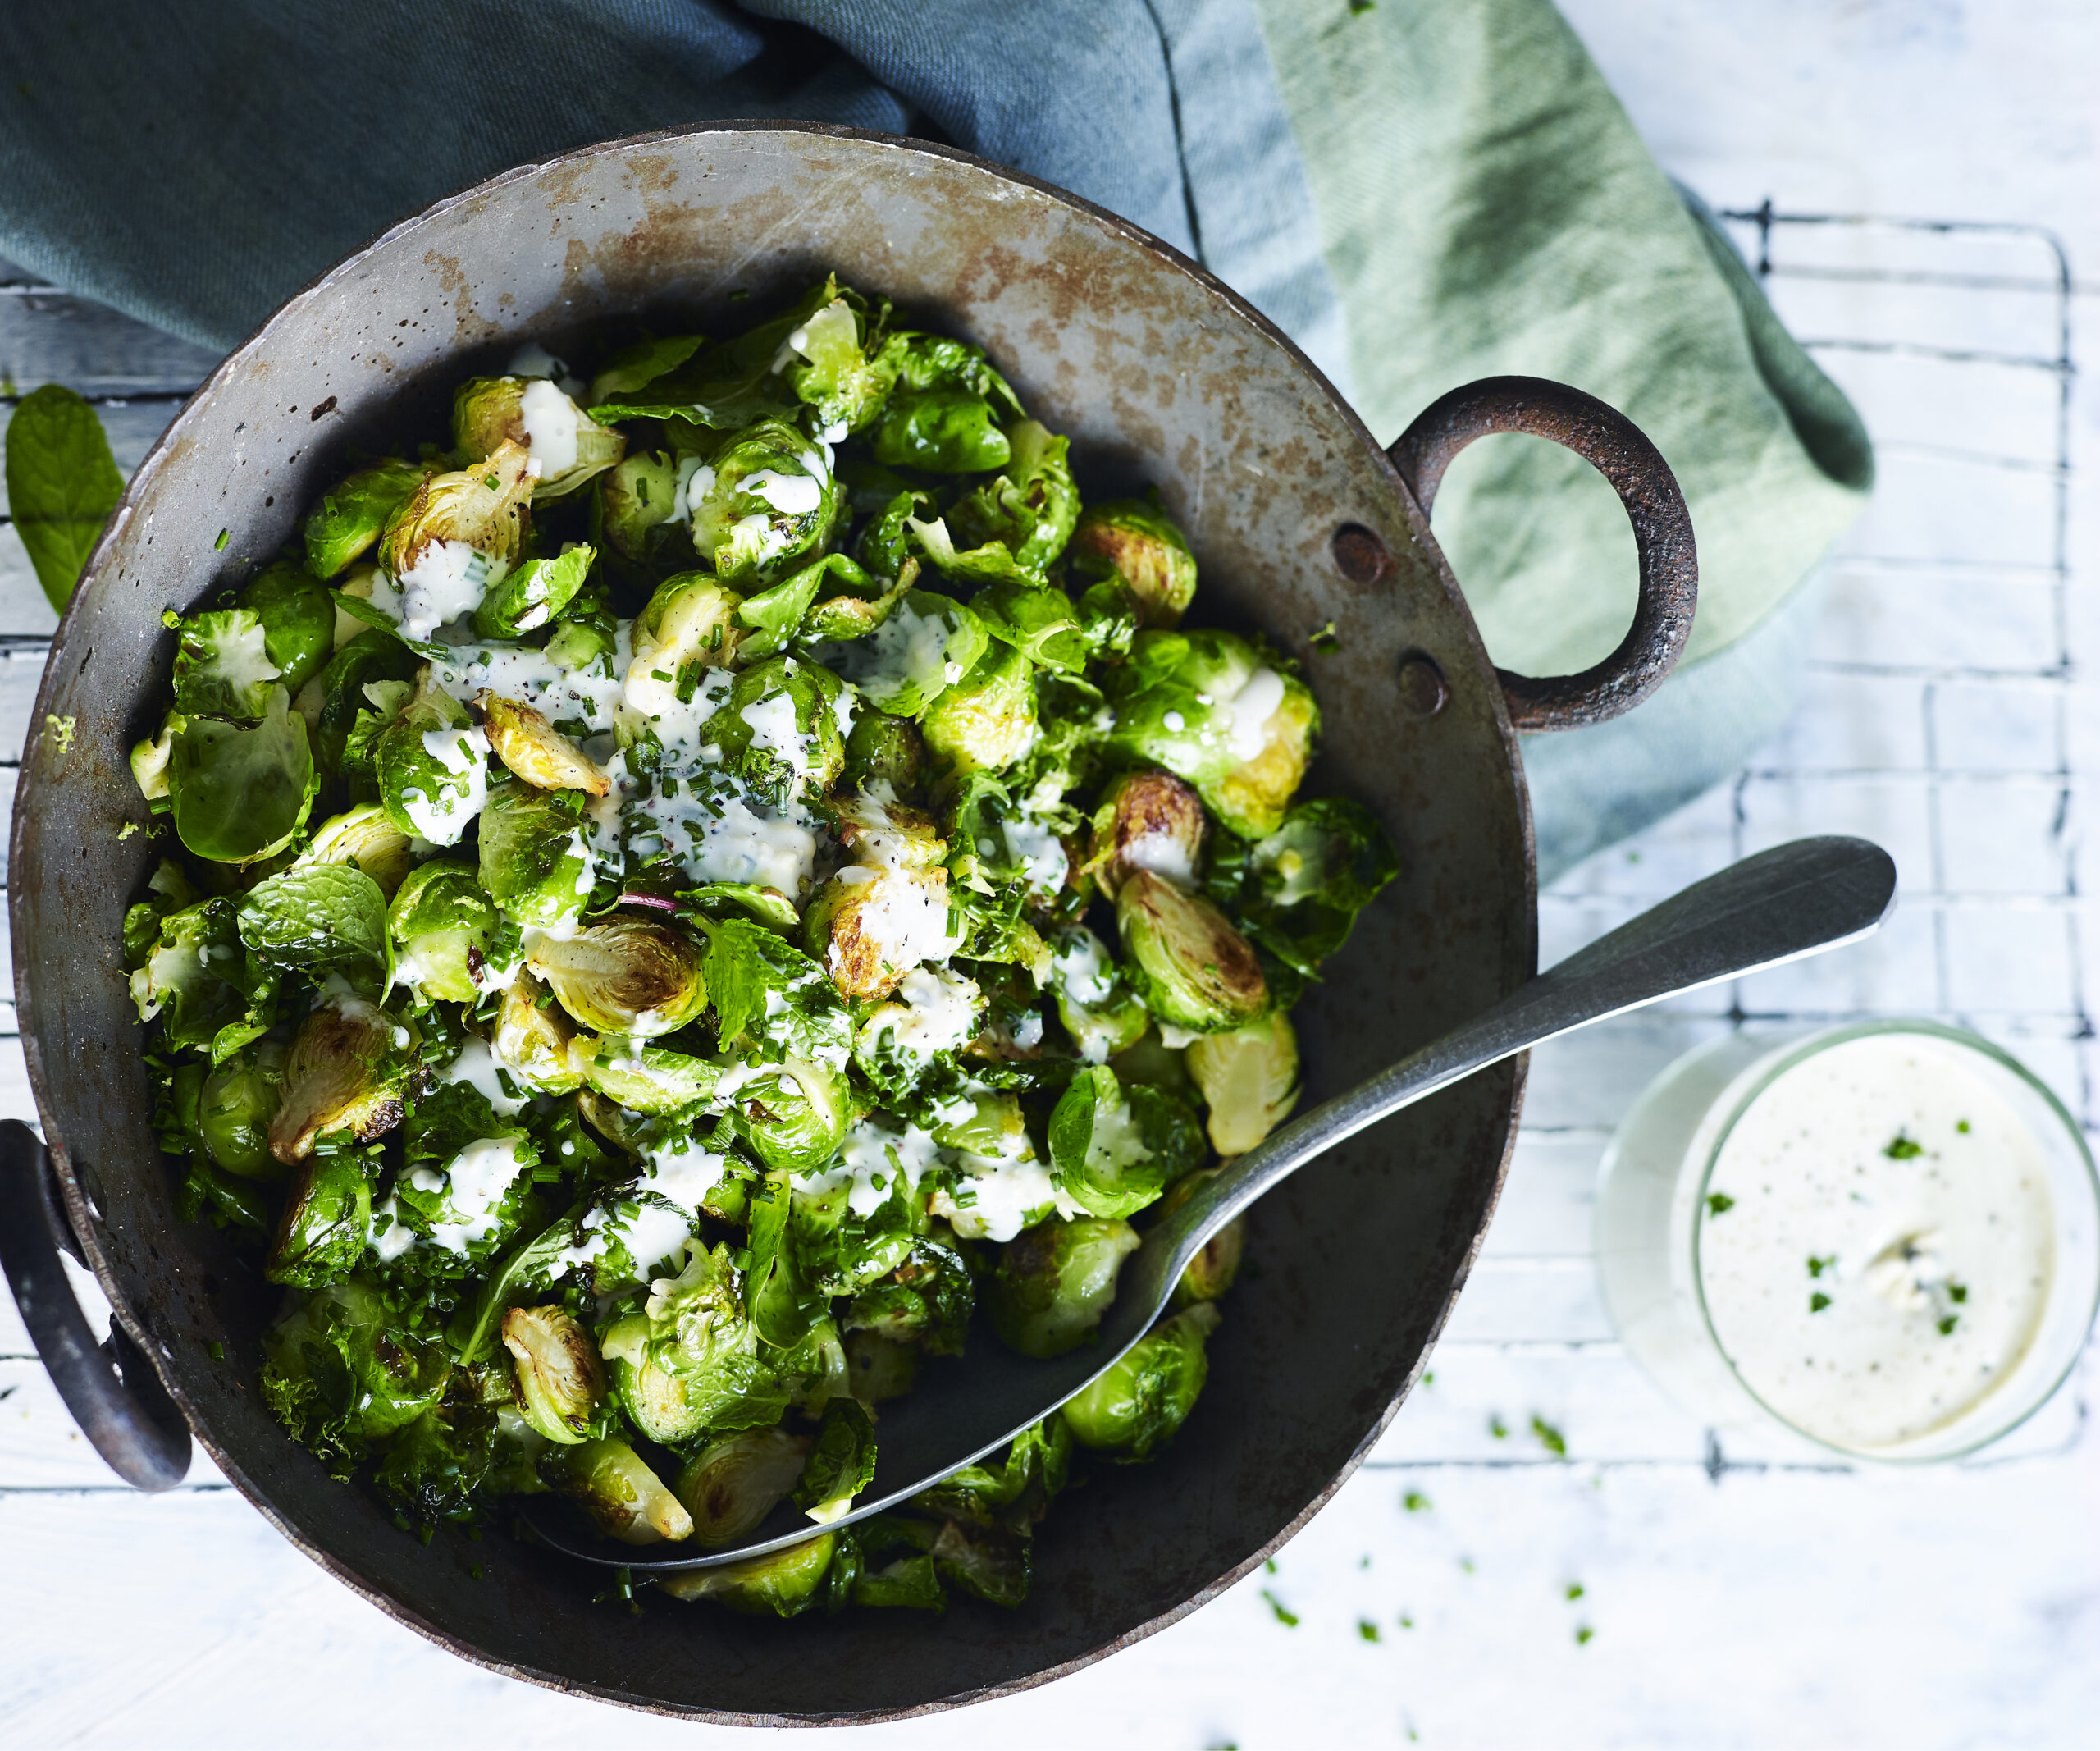 Fried brussels sprouts blue cheese dressing